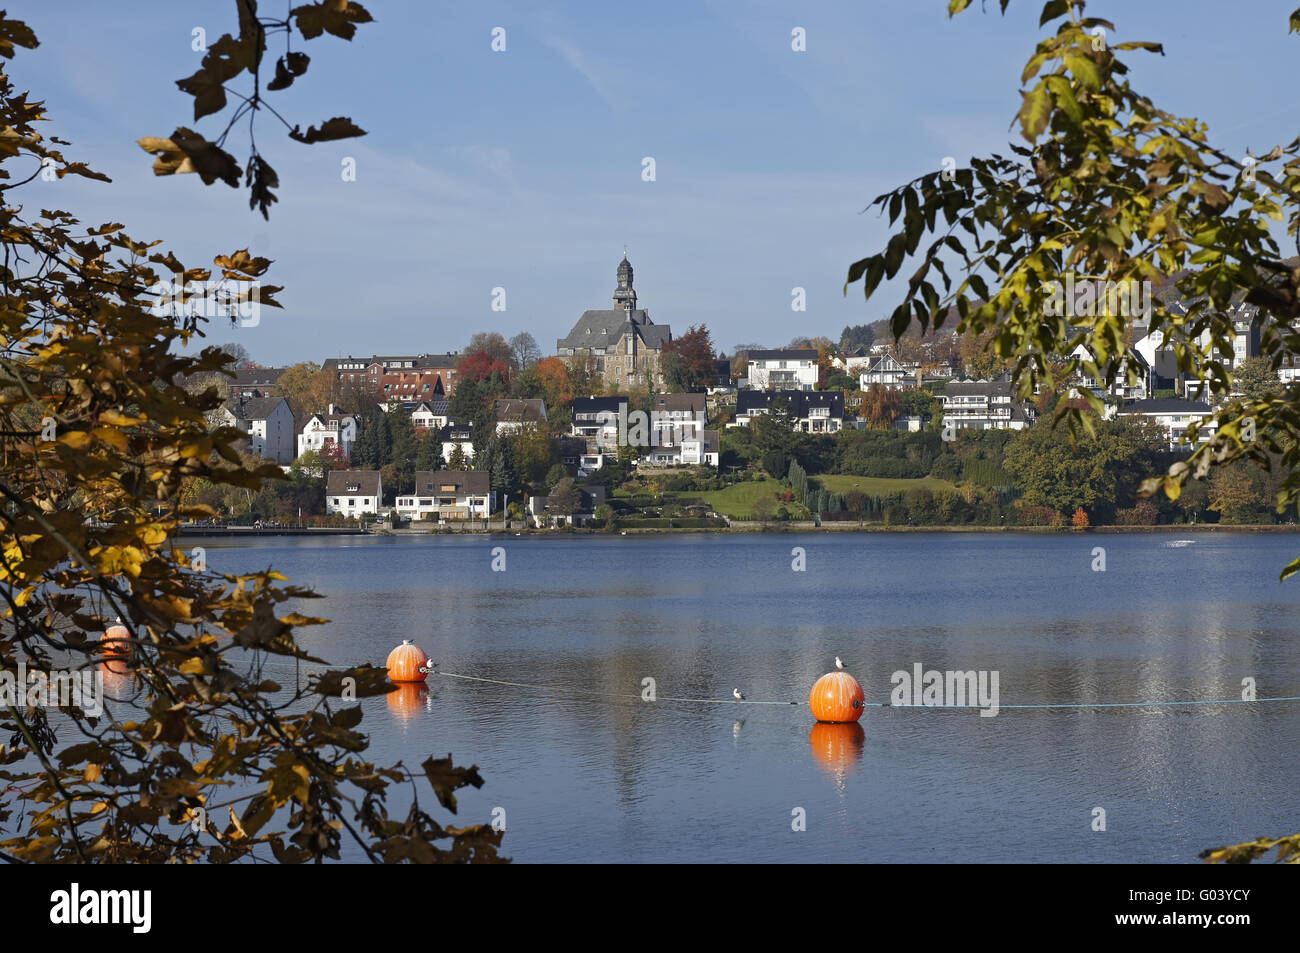 The city of Wetter an der Ruhr behind the river Ru Stock Photo